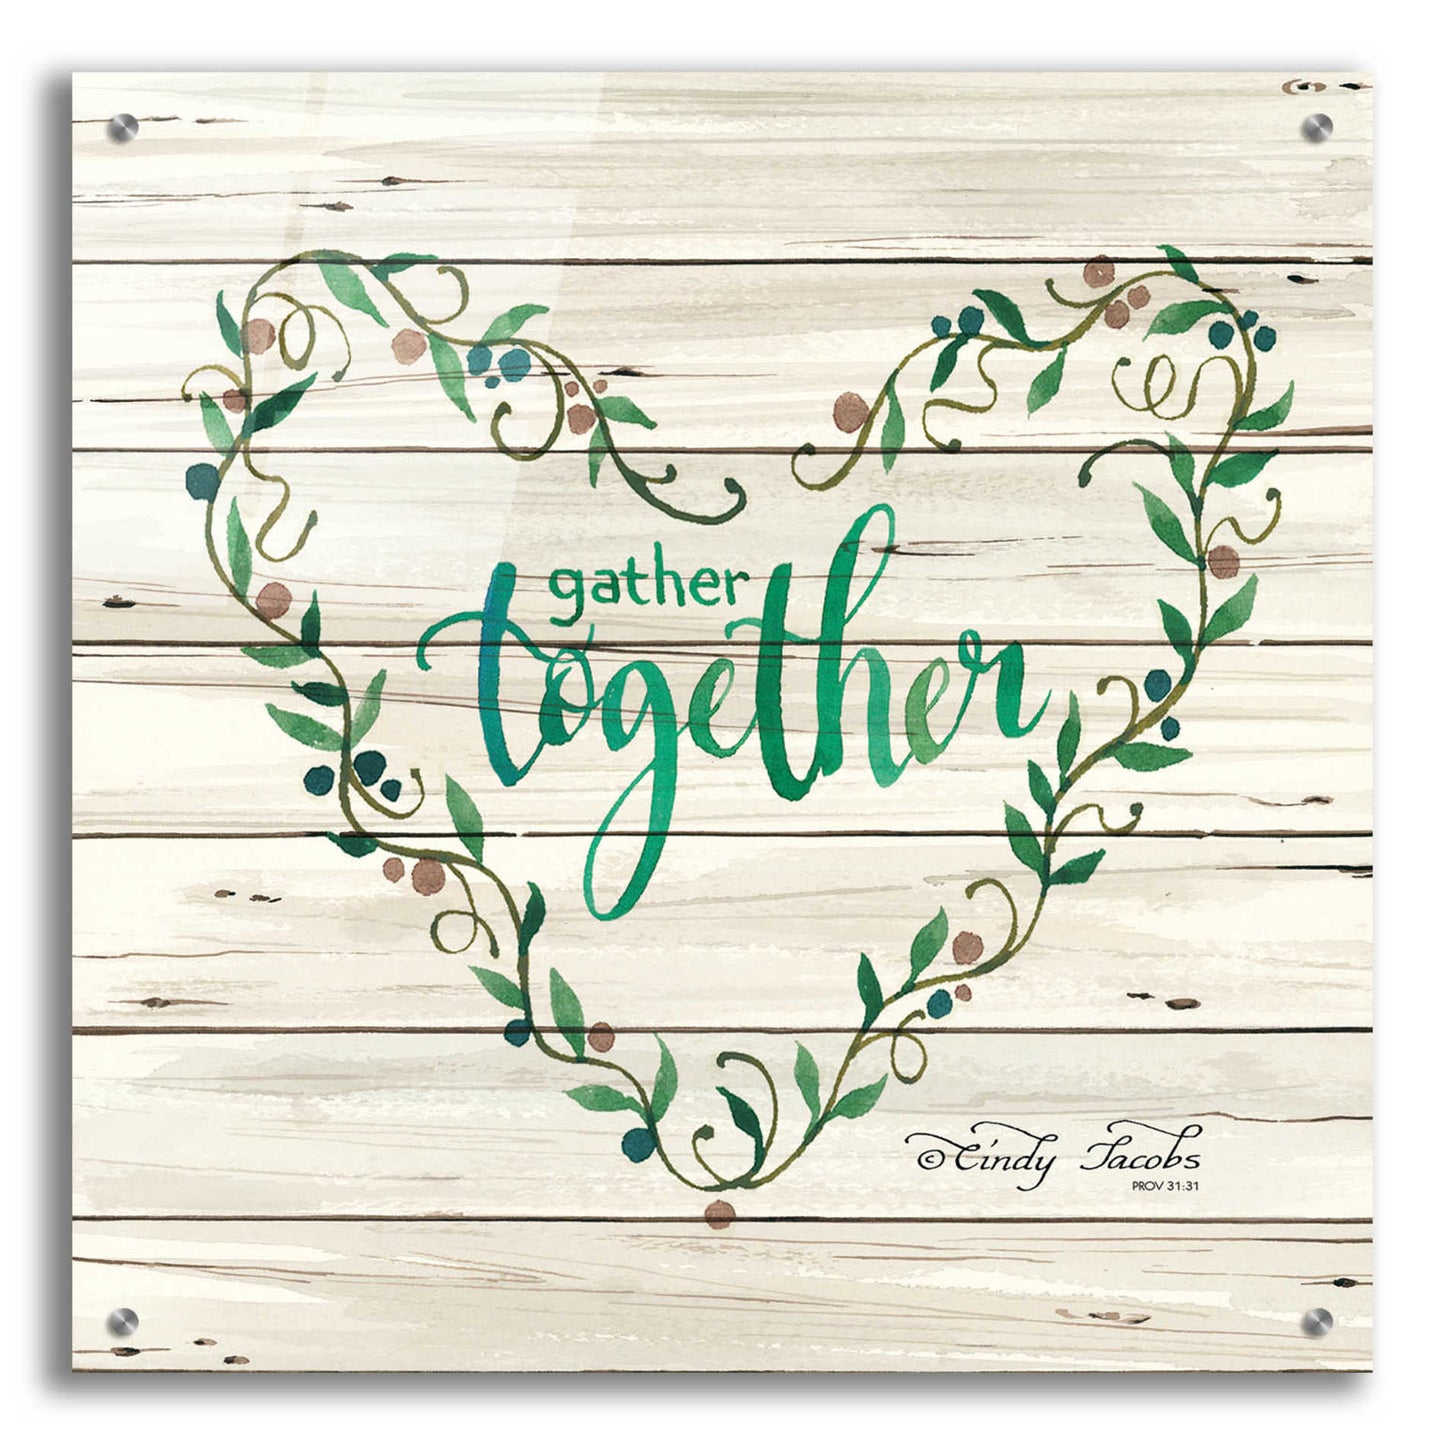 Epic Art 'Gather Together Heart Wreath' by Cindy Jacobs, Acrylic Glass Wall Art,24x24